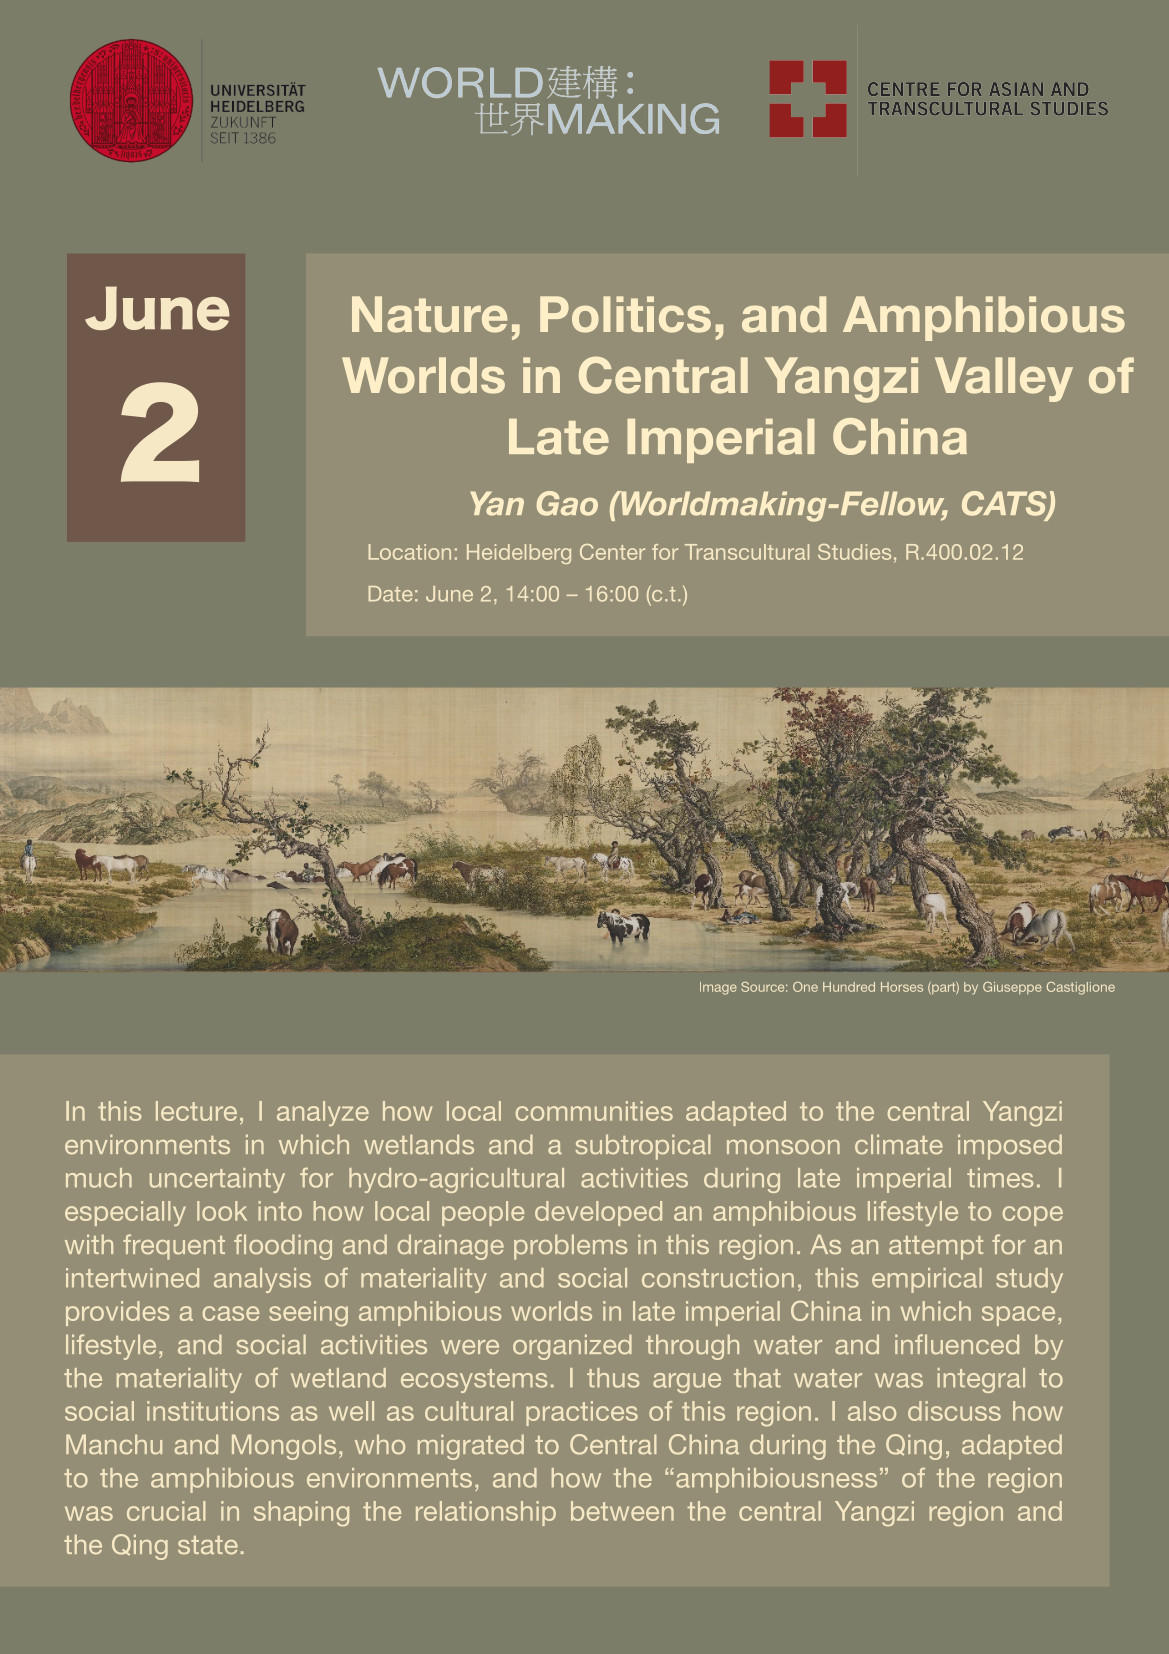 Yan Gao "Nature, Politics, and Amphibious Worlds in Central Yangzi Valley of Late Imperial China"